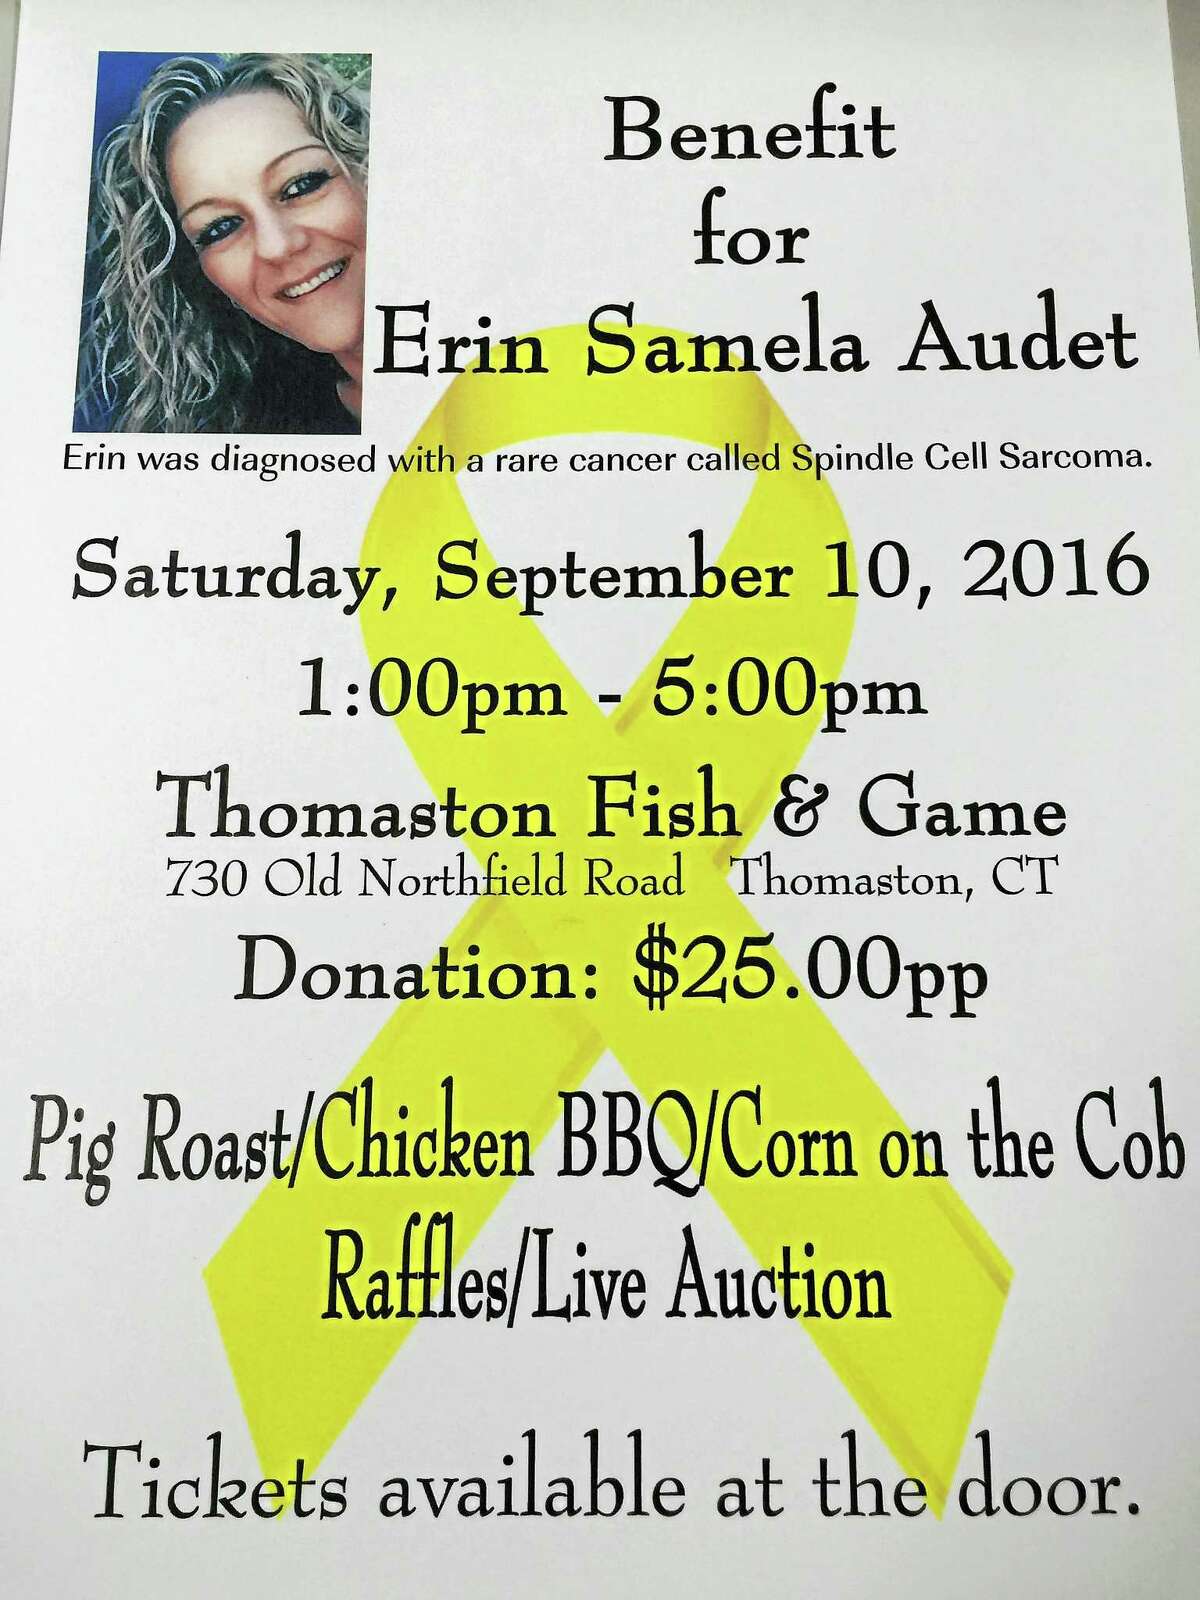 Contributed image courtesy ot Thomaston Fish & Game The flyer for the upcoming benefit for Erin Samela Audit, a local woman diagnosed with cancer.